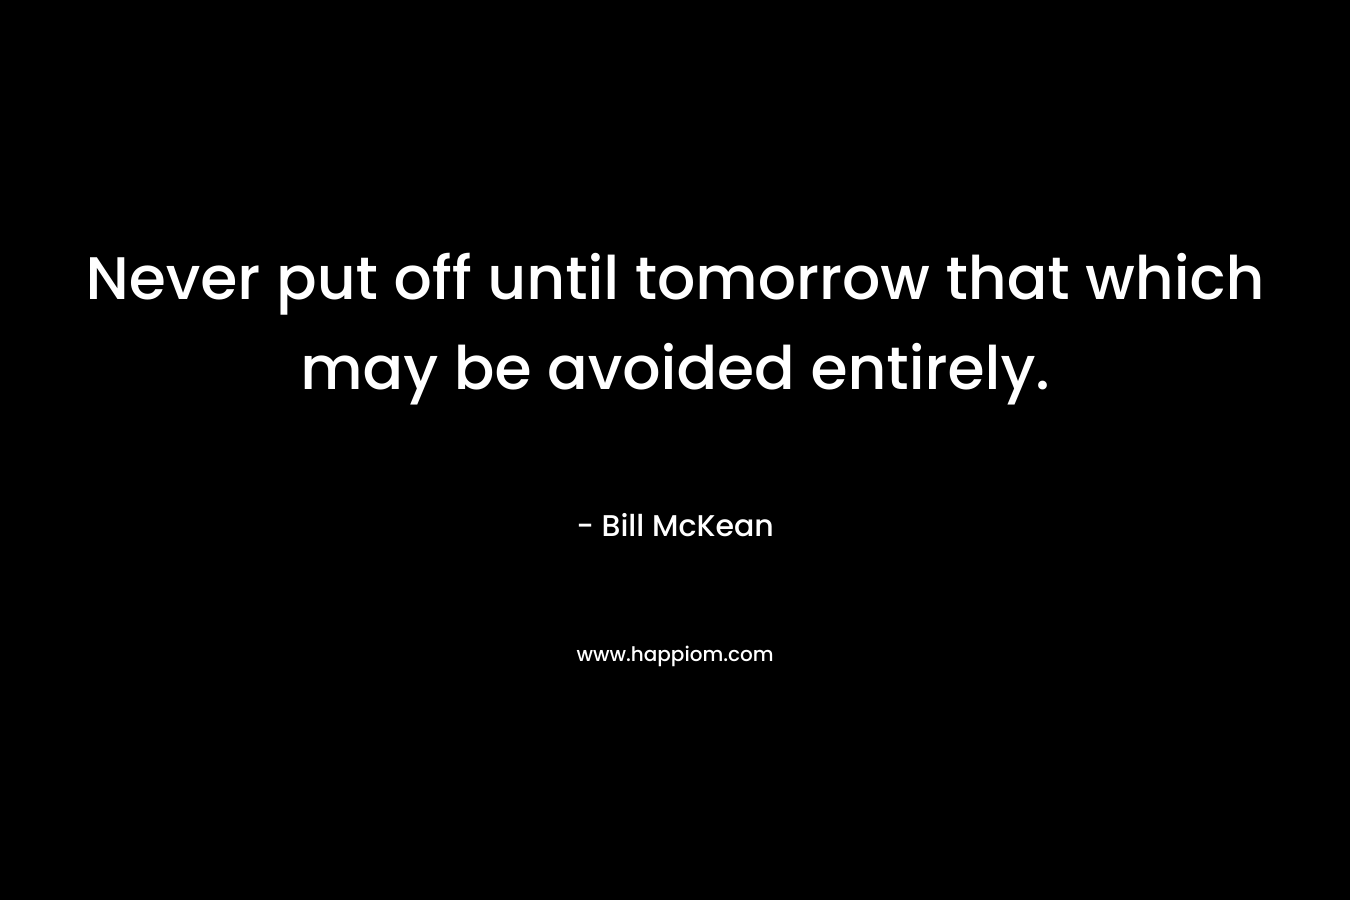 Never put off until tomorrow that which may be avoided entirely. – Bill McKean